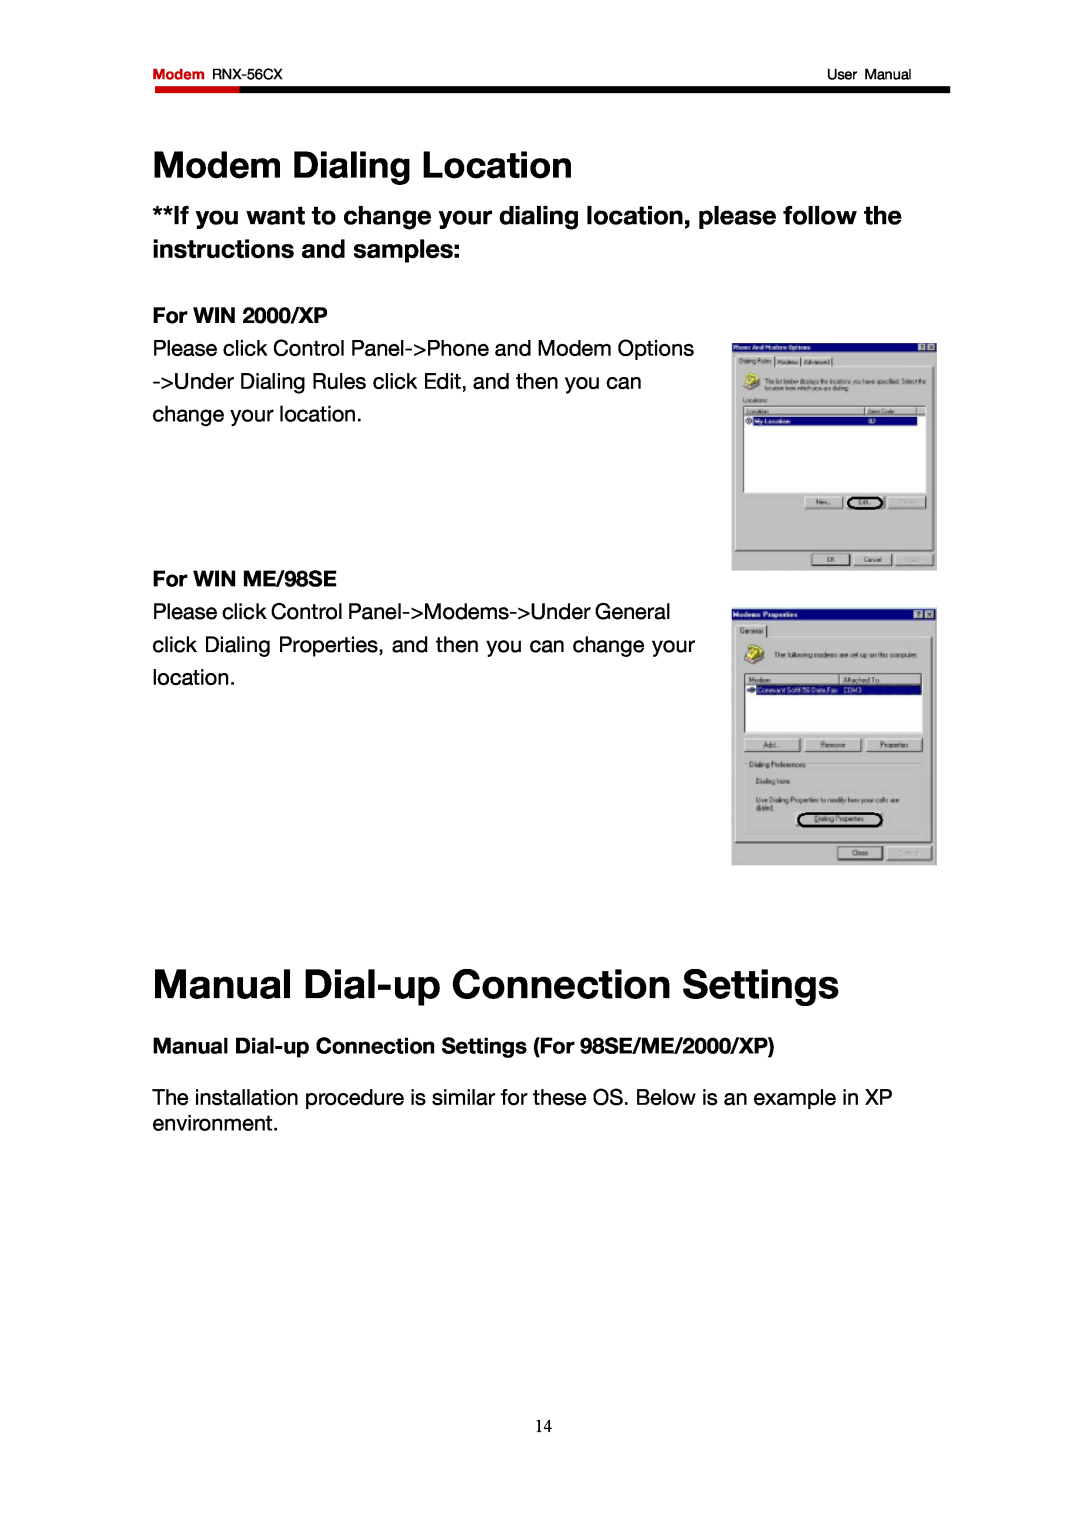 Rosewill RNX-56CX user manual Modem Dialing Location, For WIN 2000/XP, For WIN ME/98SE, Manual Dial-up Connection Settings 